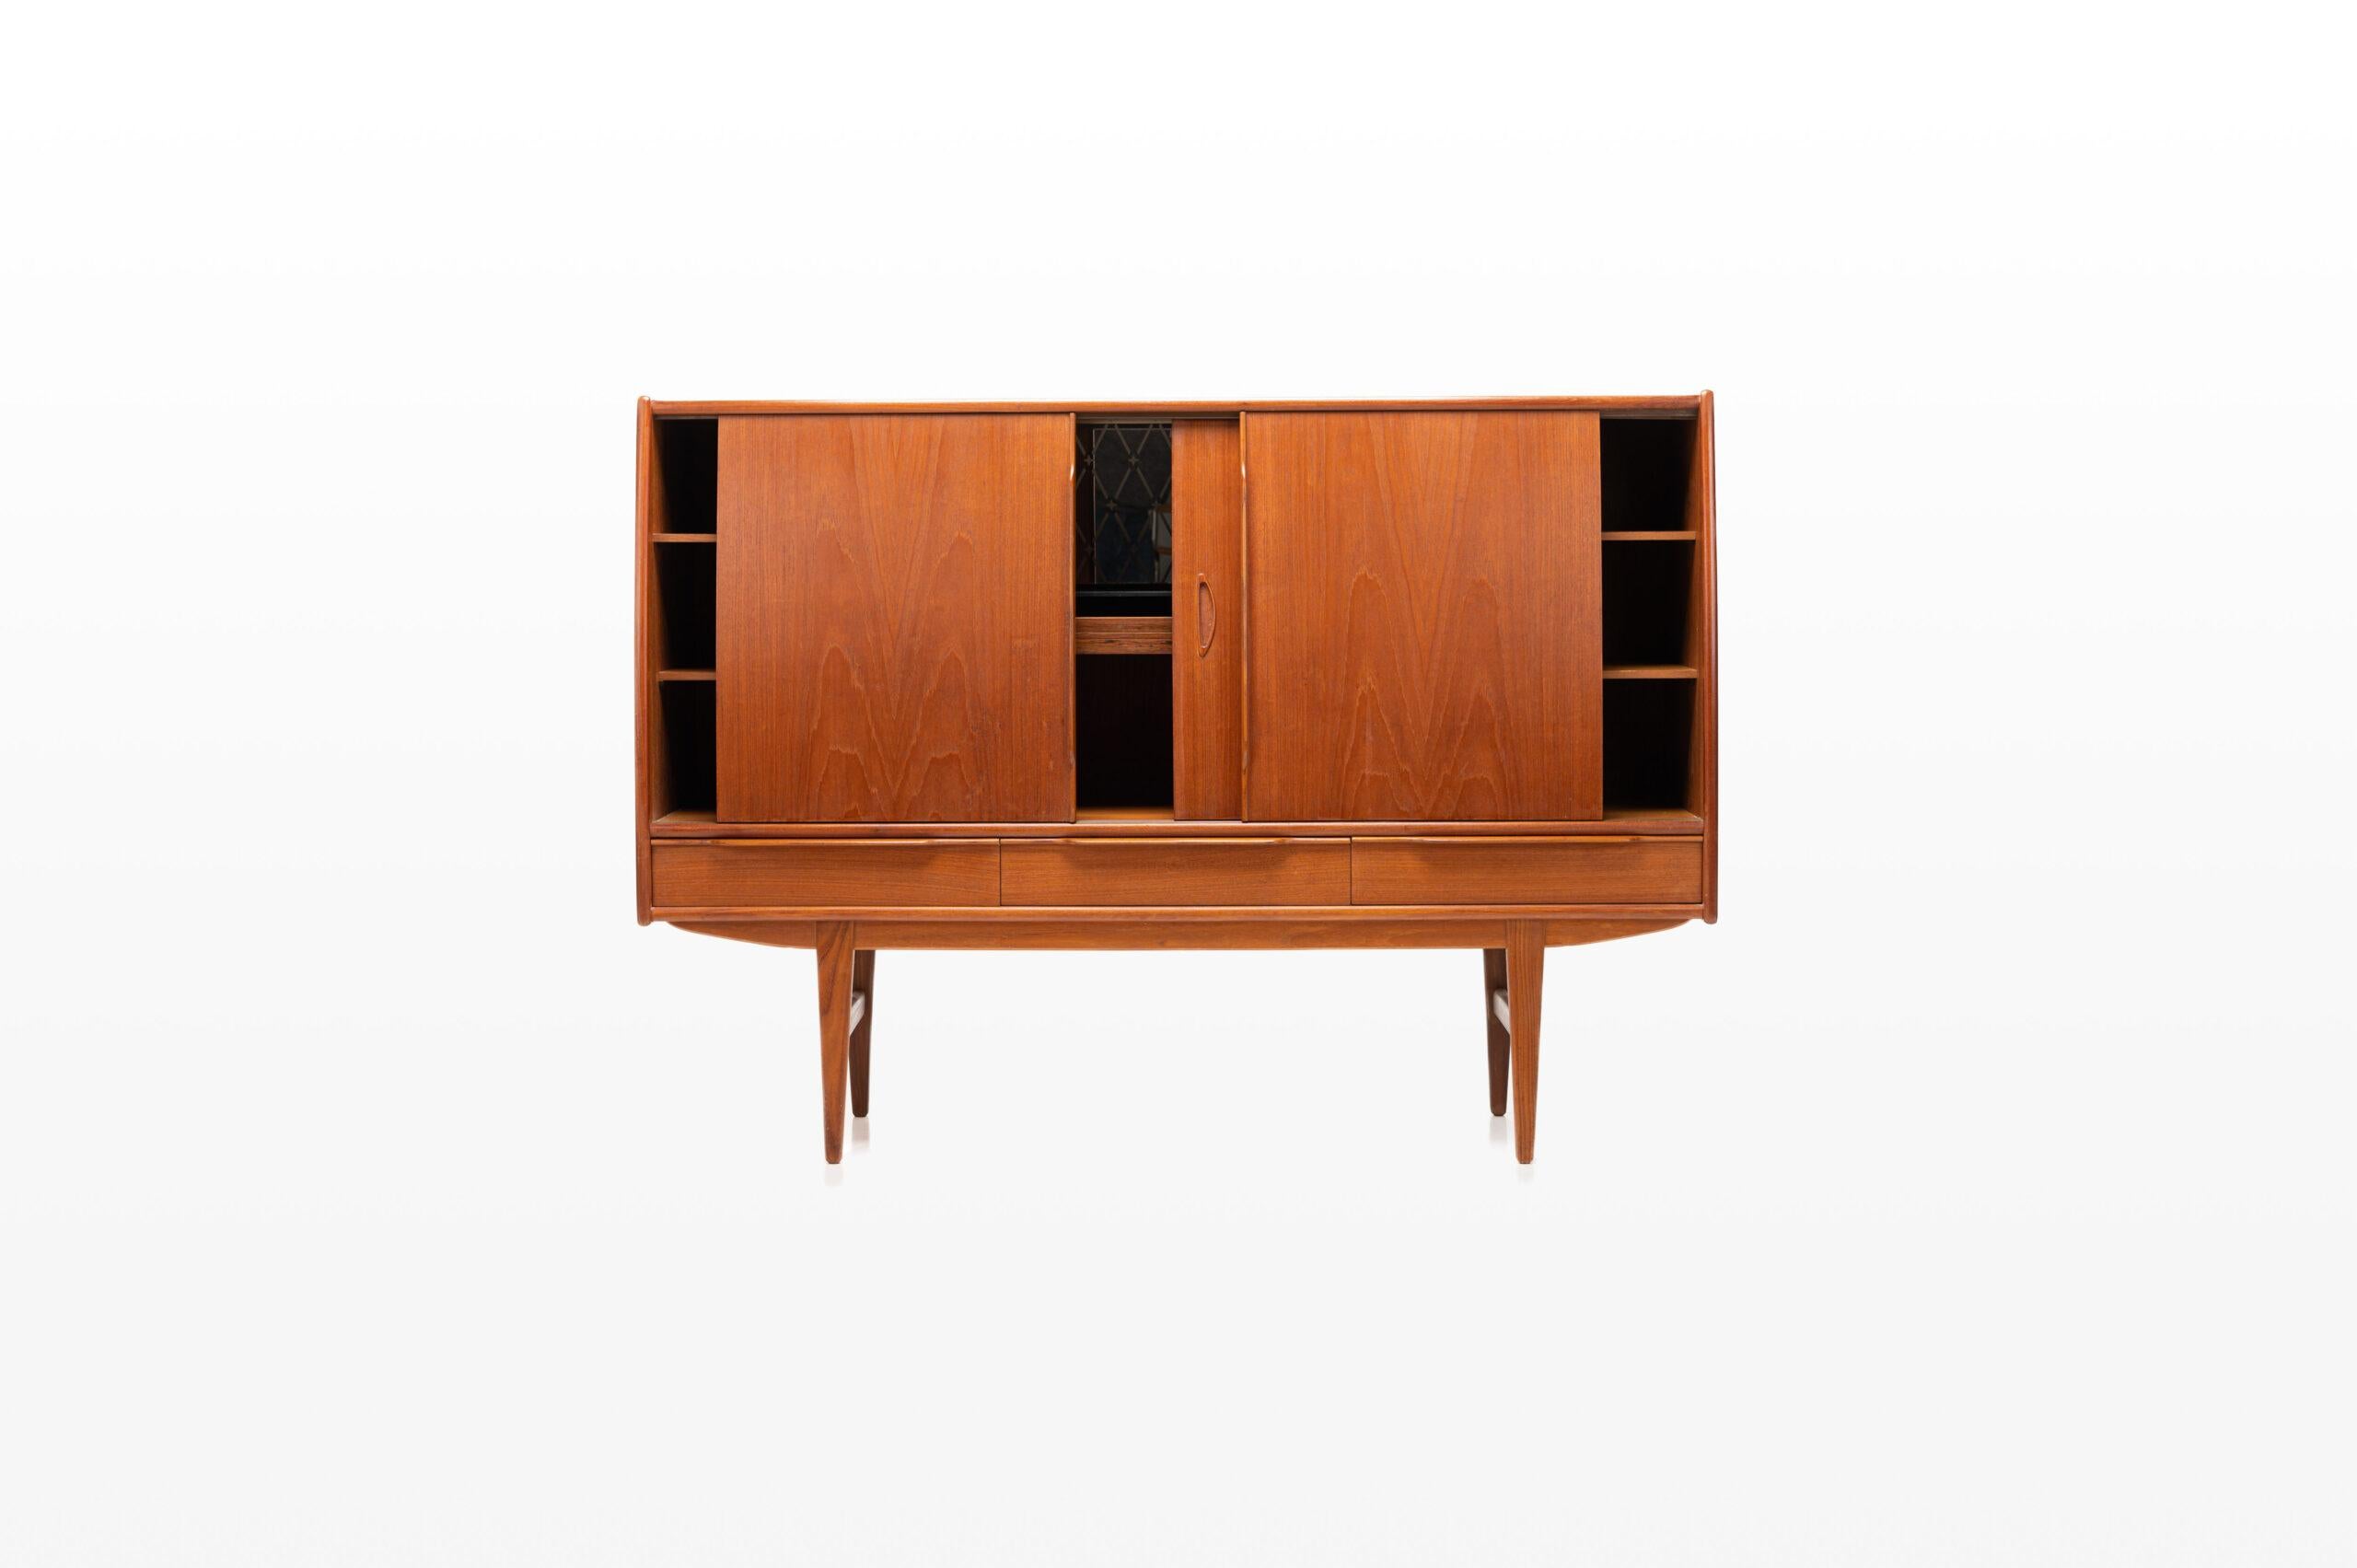 Vintage teak sideboard produced in Denmark in the 1960s. The sideboard has three sliding doors, elegant handles and an integrated bar area. The sideboard is in beautiful vintage condition.
 